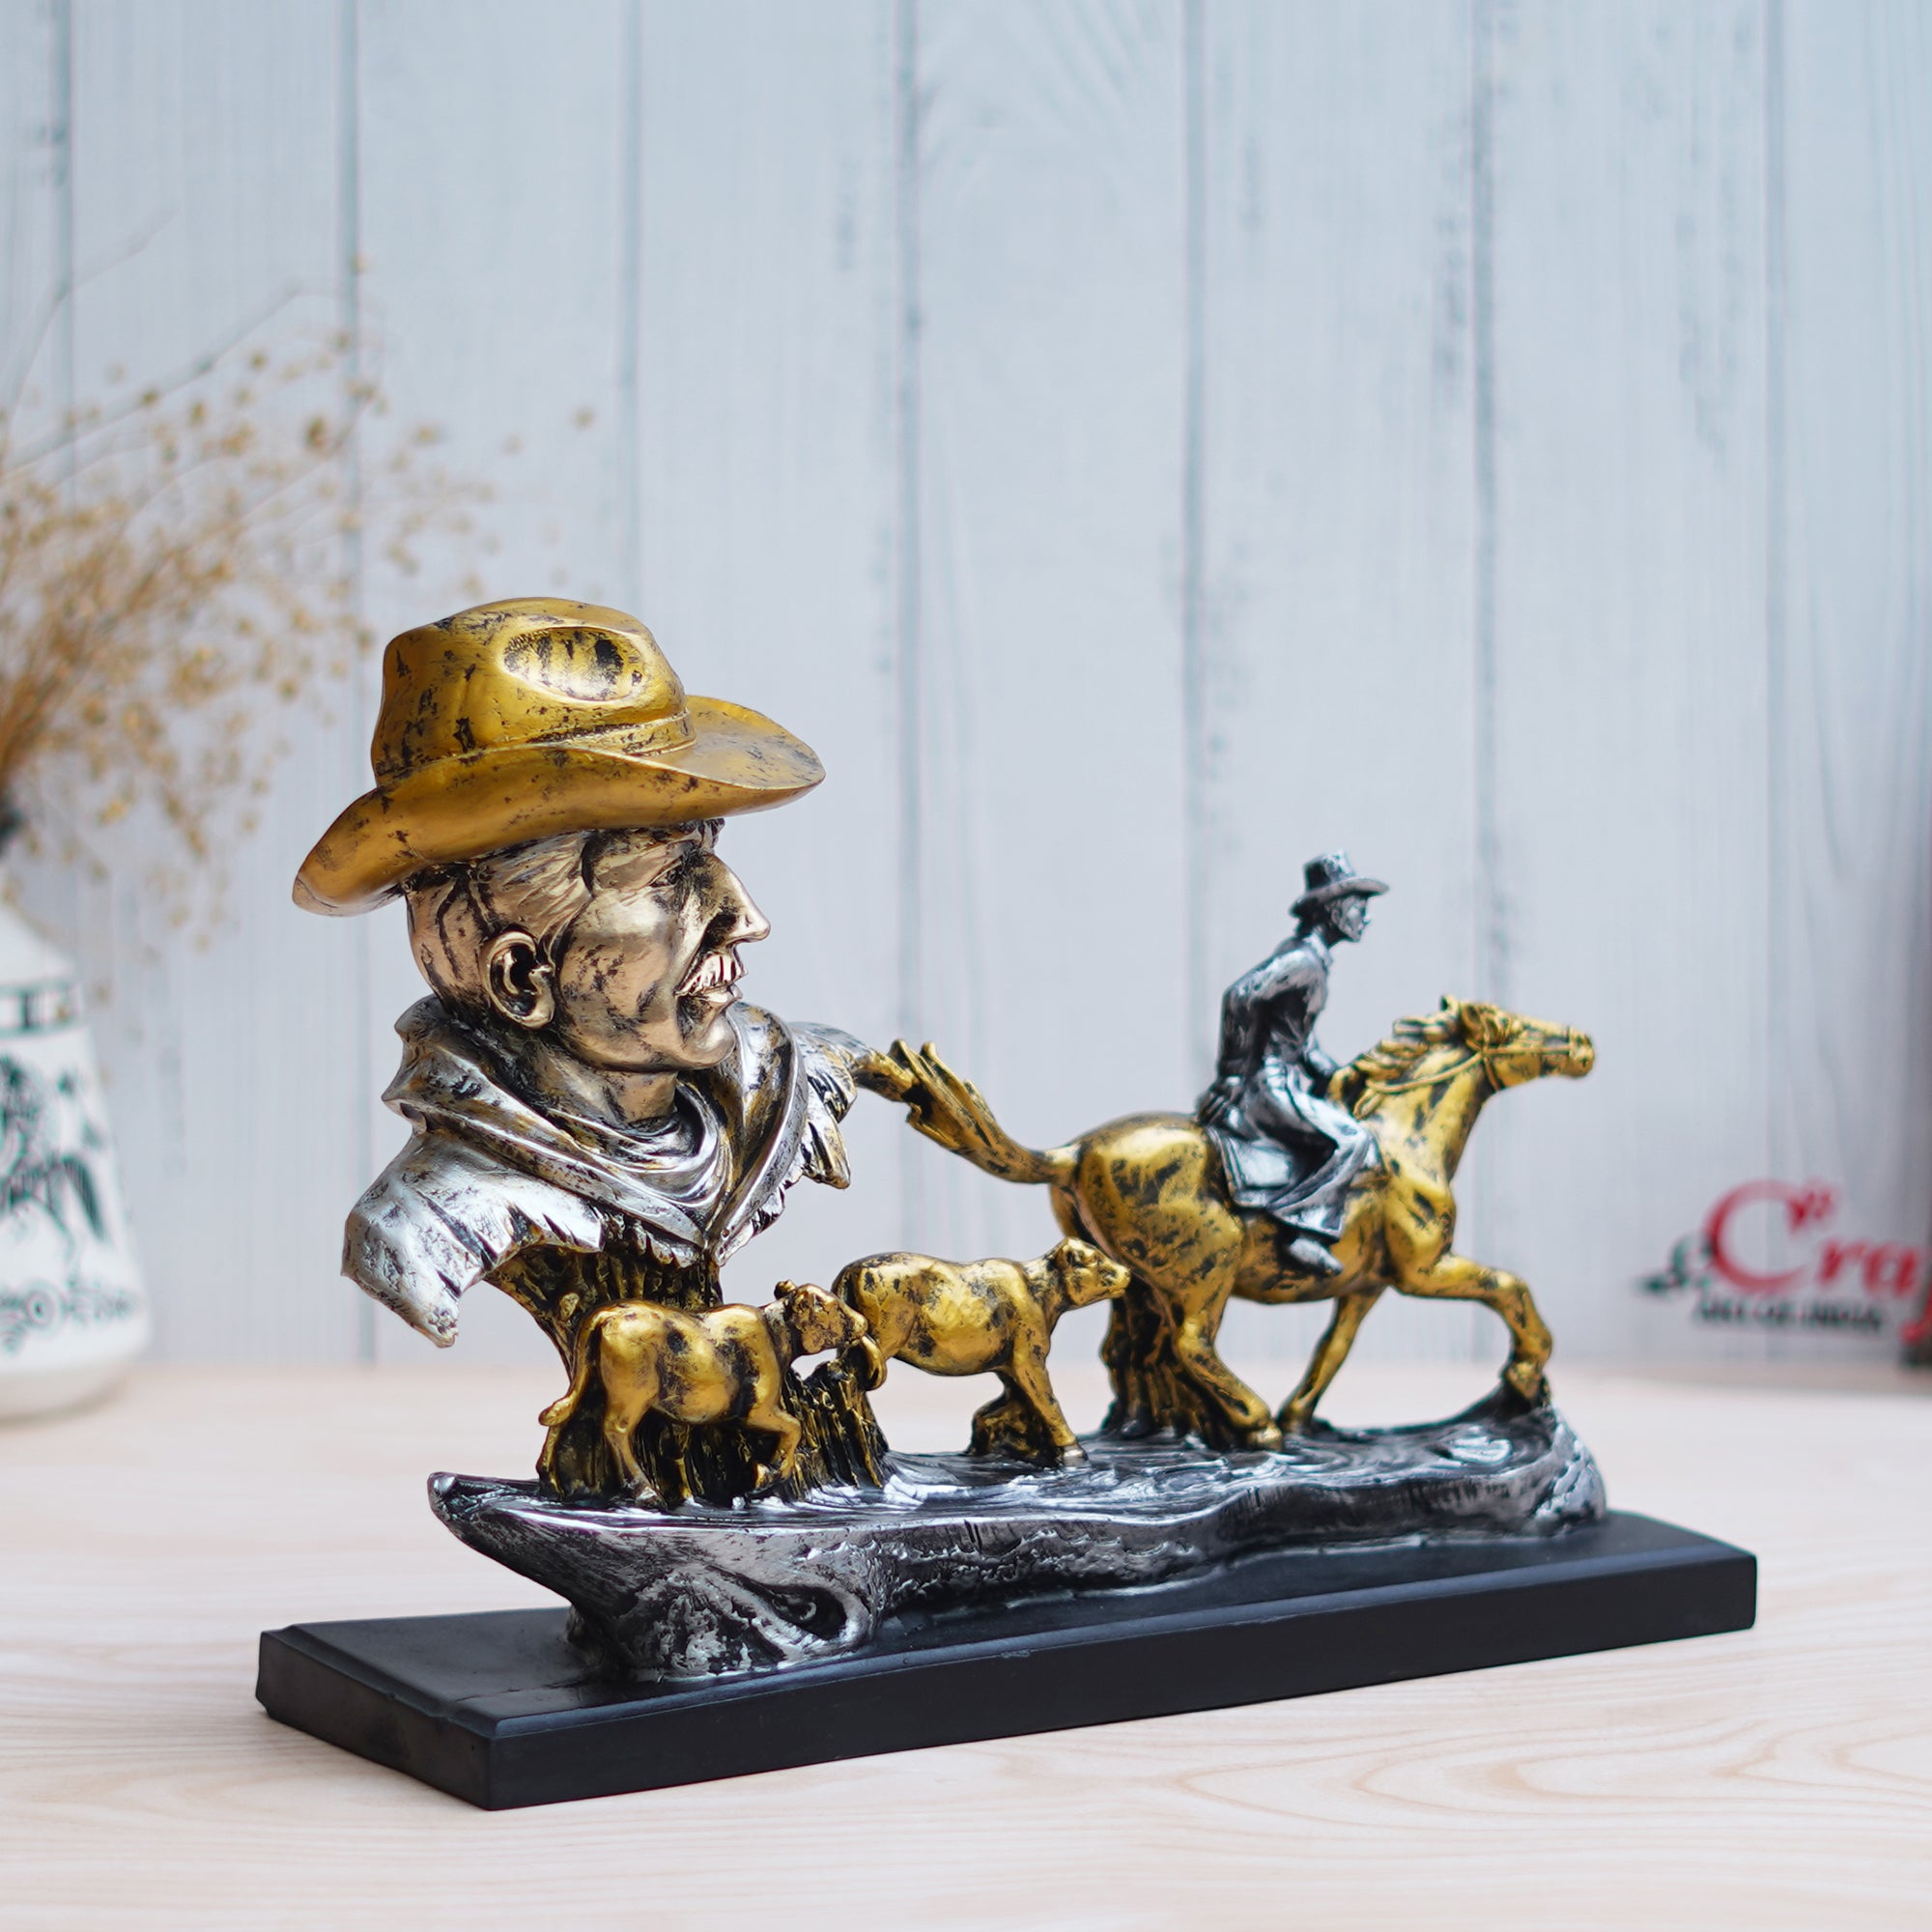 Antique Cowboys Face with Boy Sitting on Running Horse & Cow Statues Decorative Showpiece 4